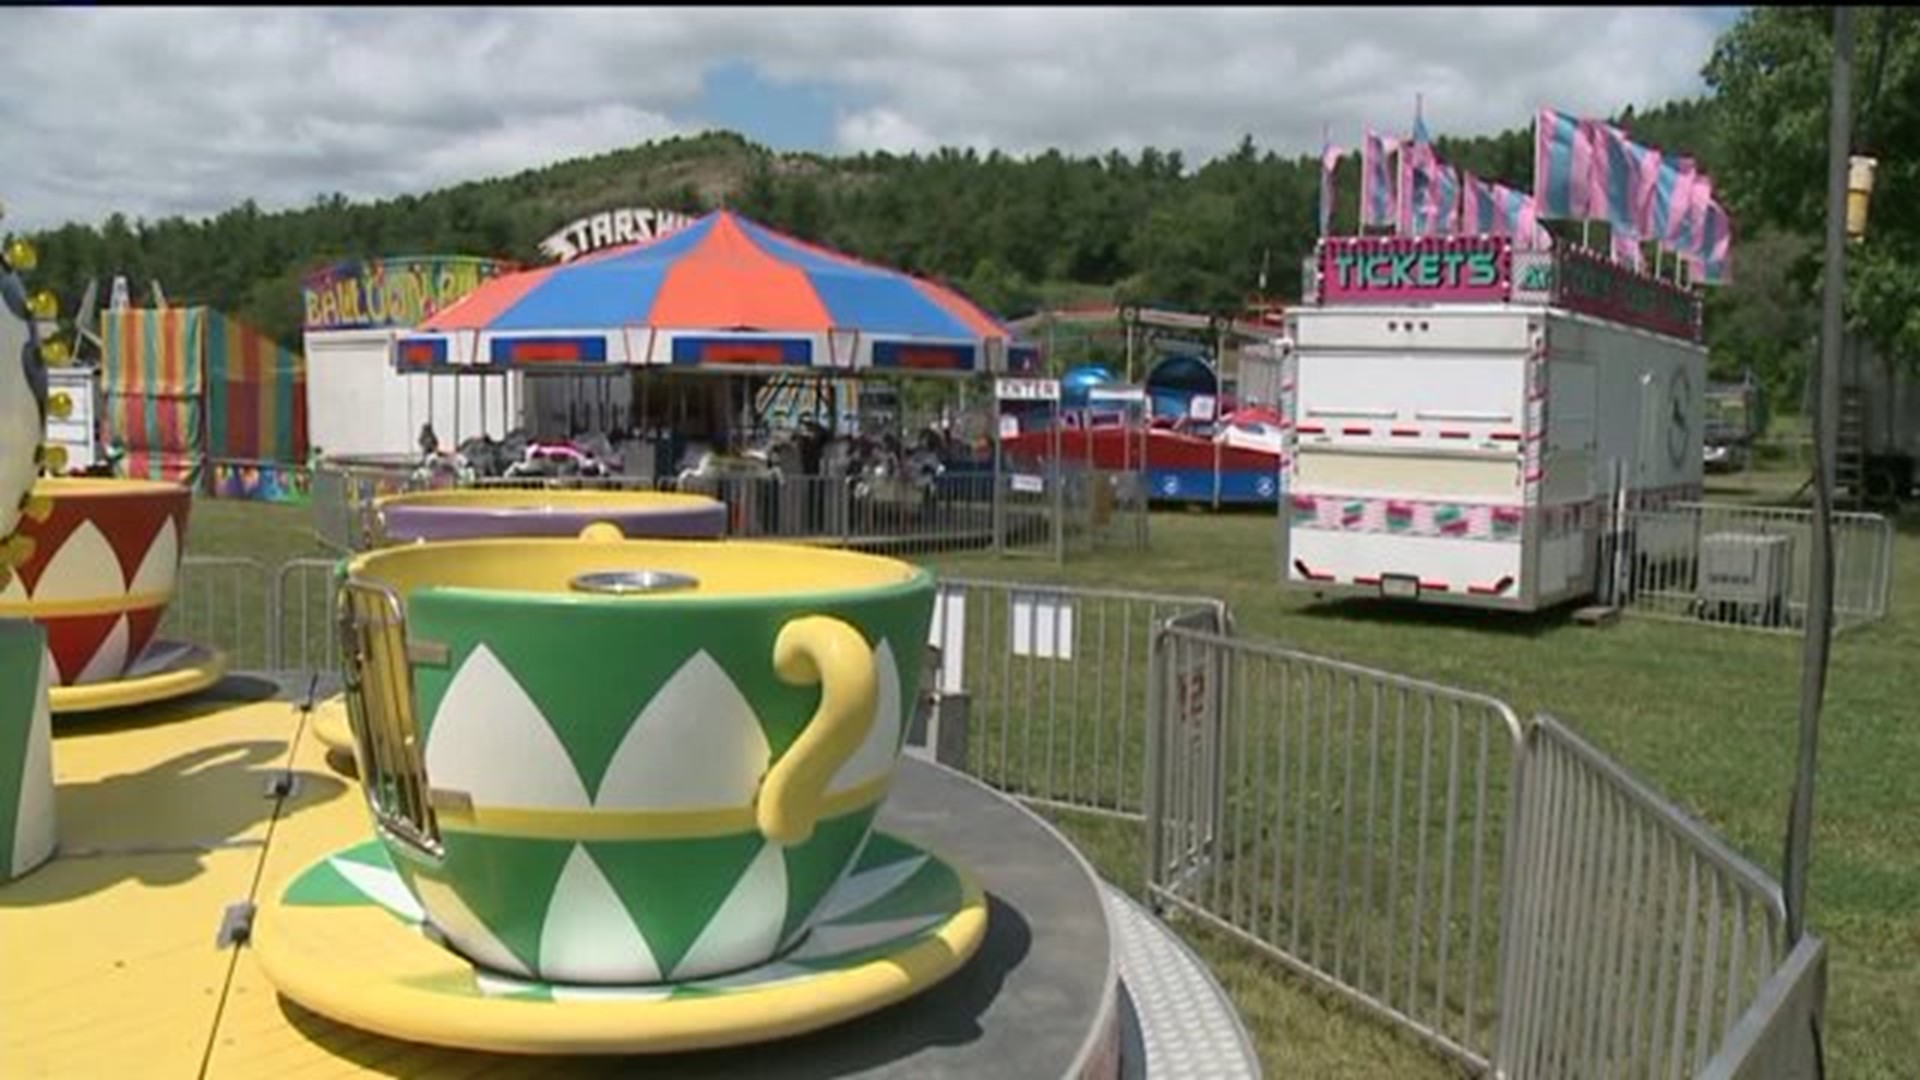 Carbon County Fair Adds More Dates, Rides | wnep.com